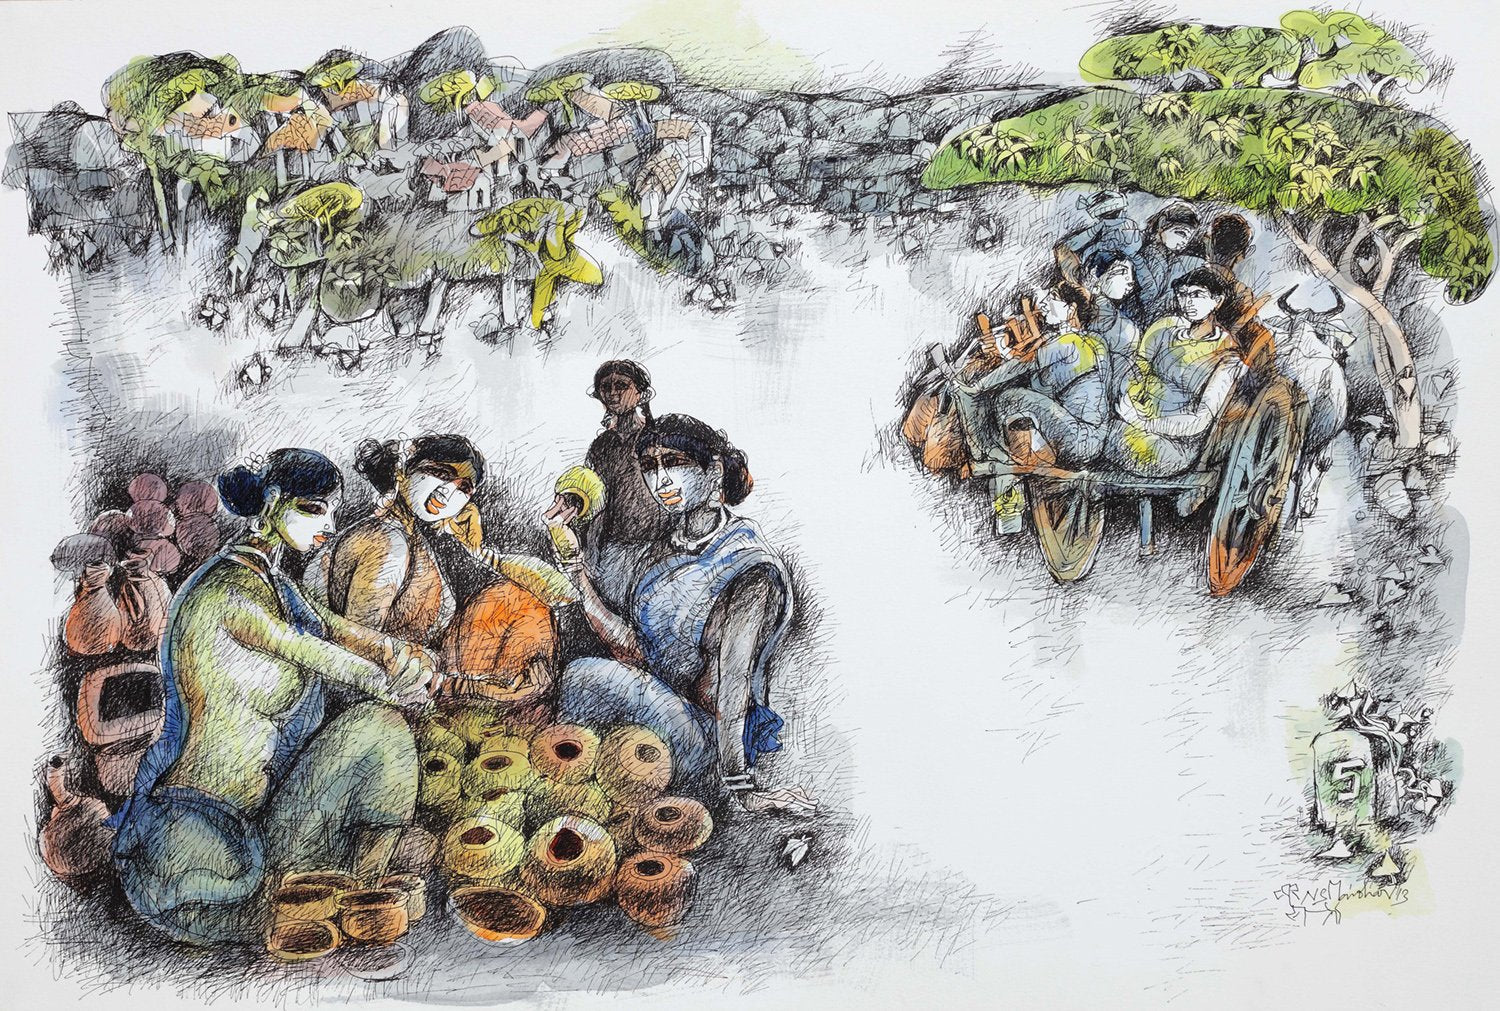 Pastoral Life 11|N.S. Manohar- Water colour on Board, 2013, 22 x 30 inches